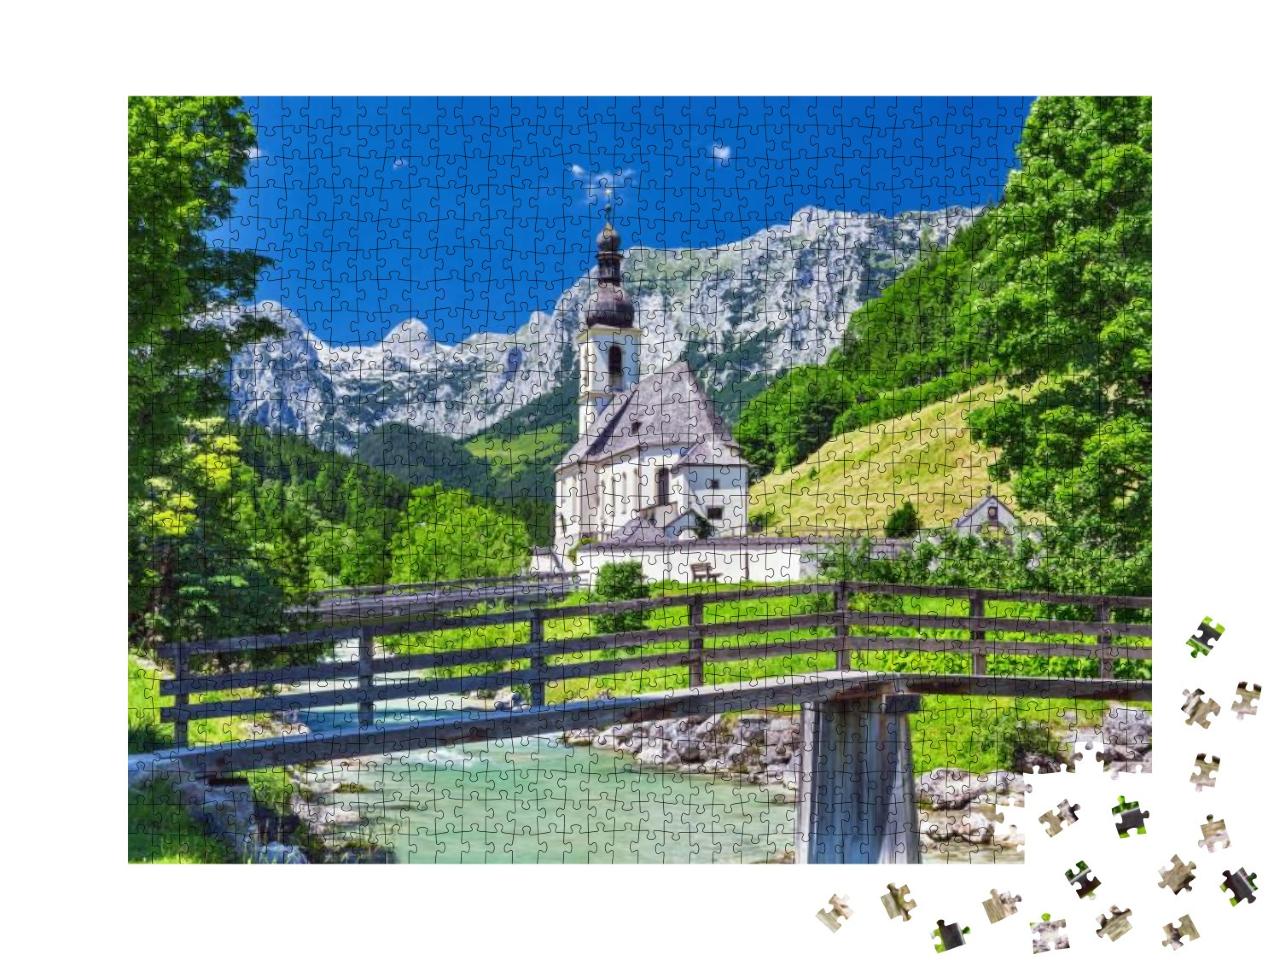 Scenic Mountain Landscape in the Bavarian Alps & Famous P... Jigsaw Puzzle with 1000 pieces